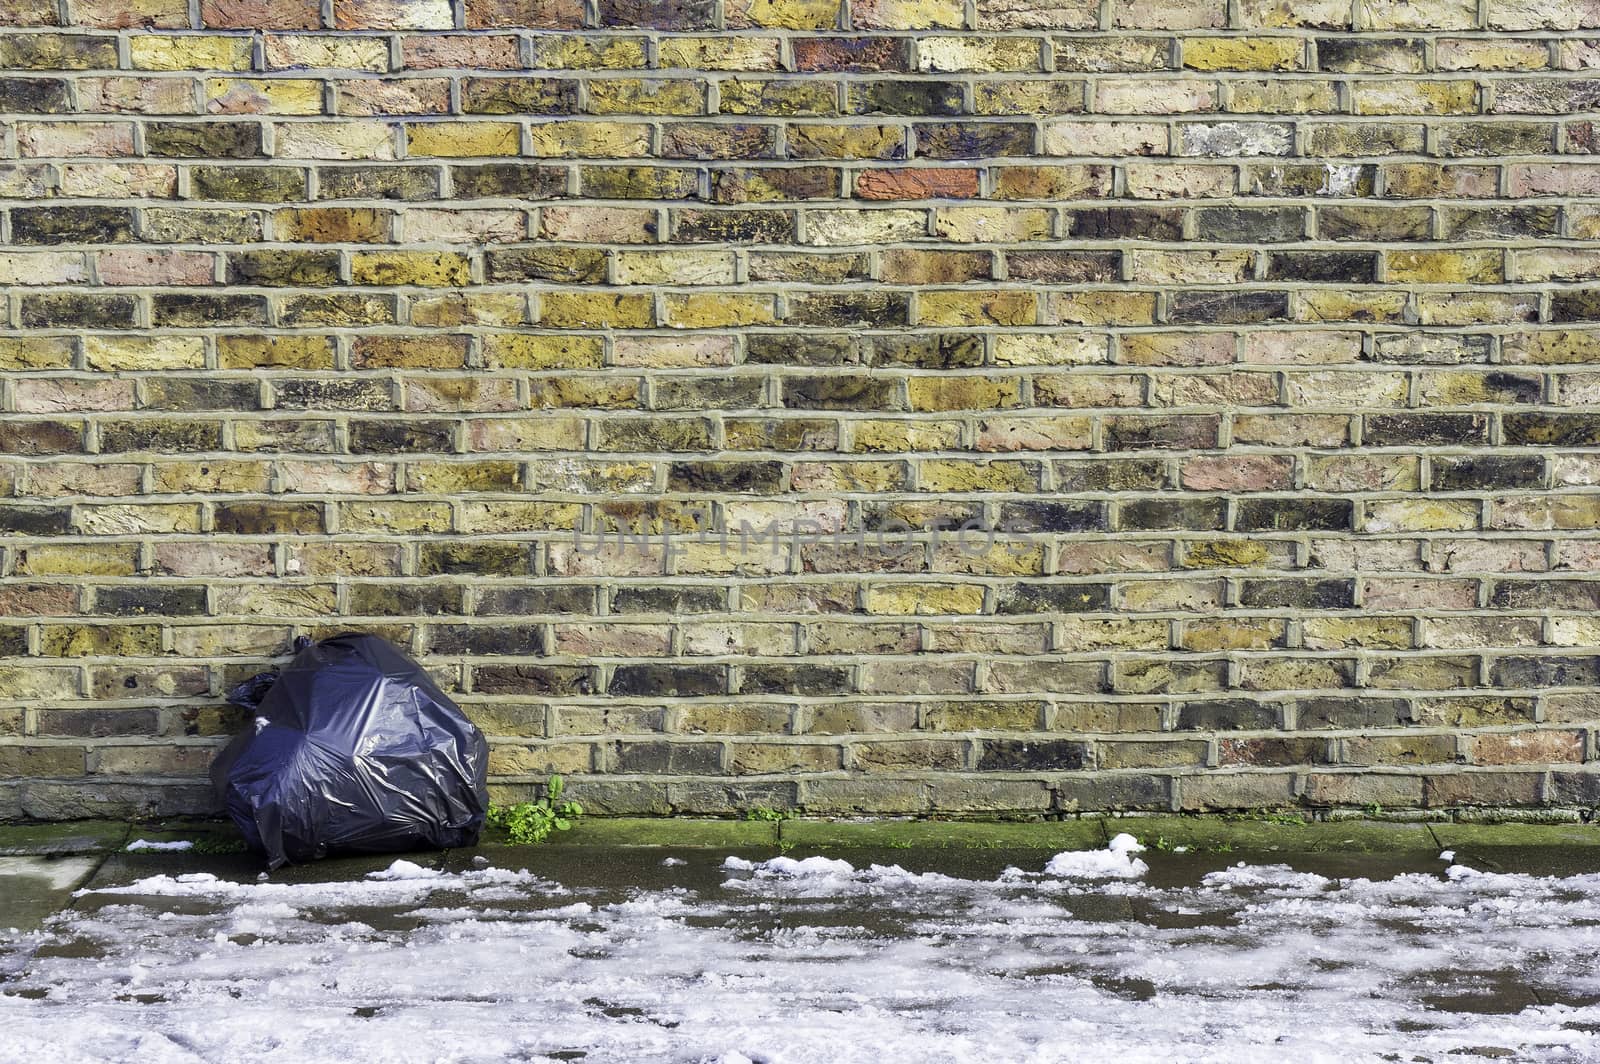 A colorful brick wall with a single black garbage sack left leaning against it